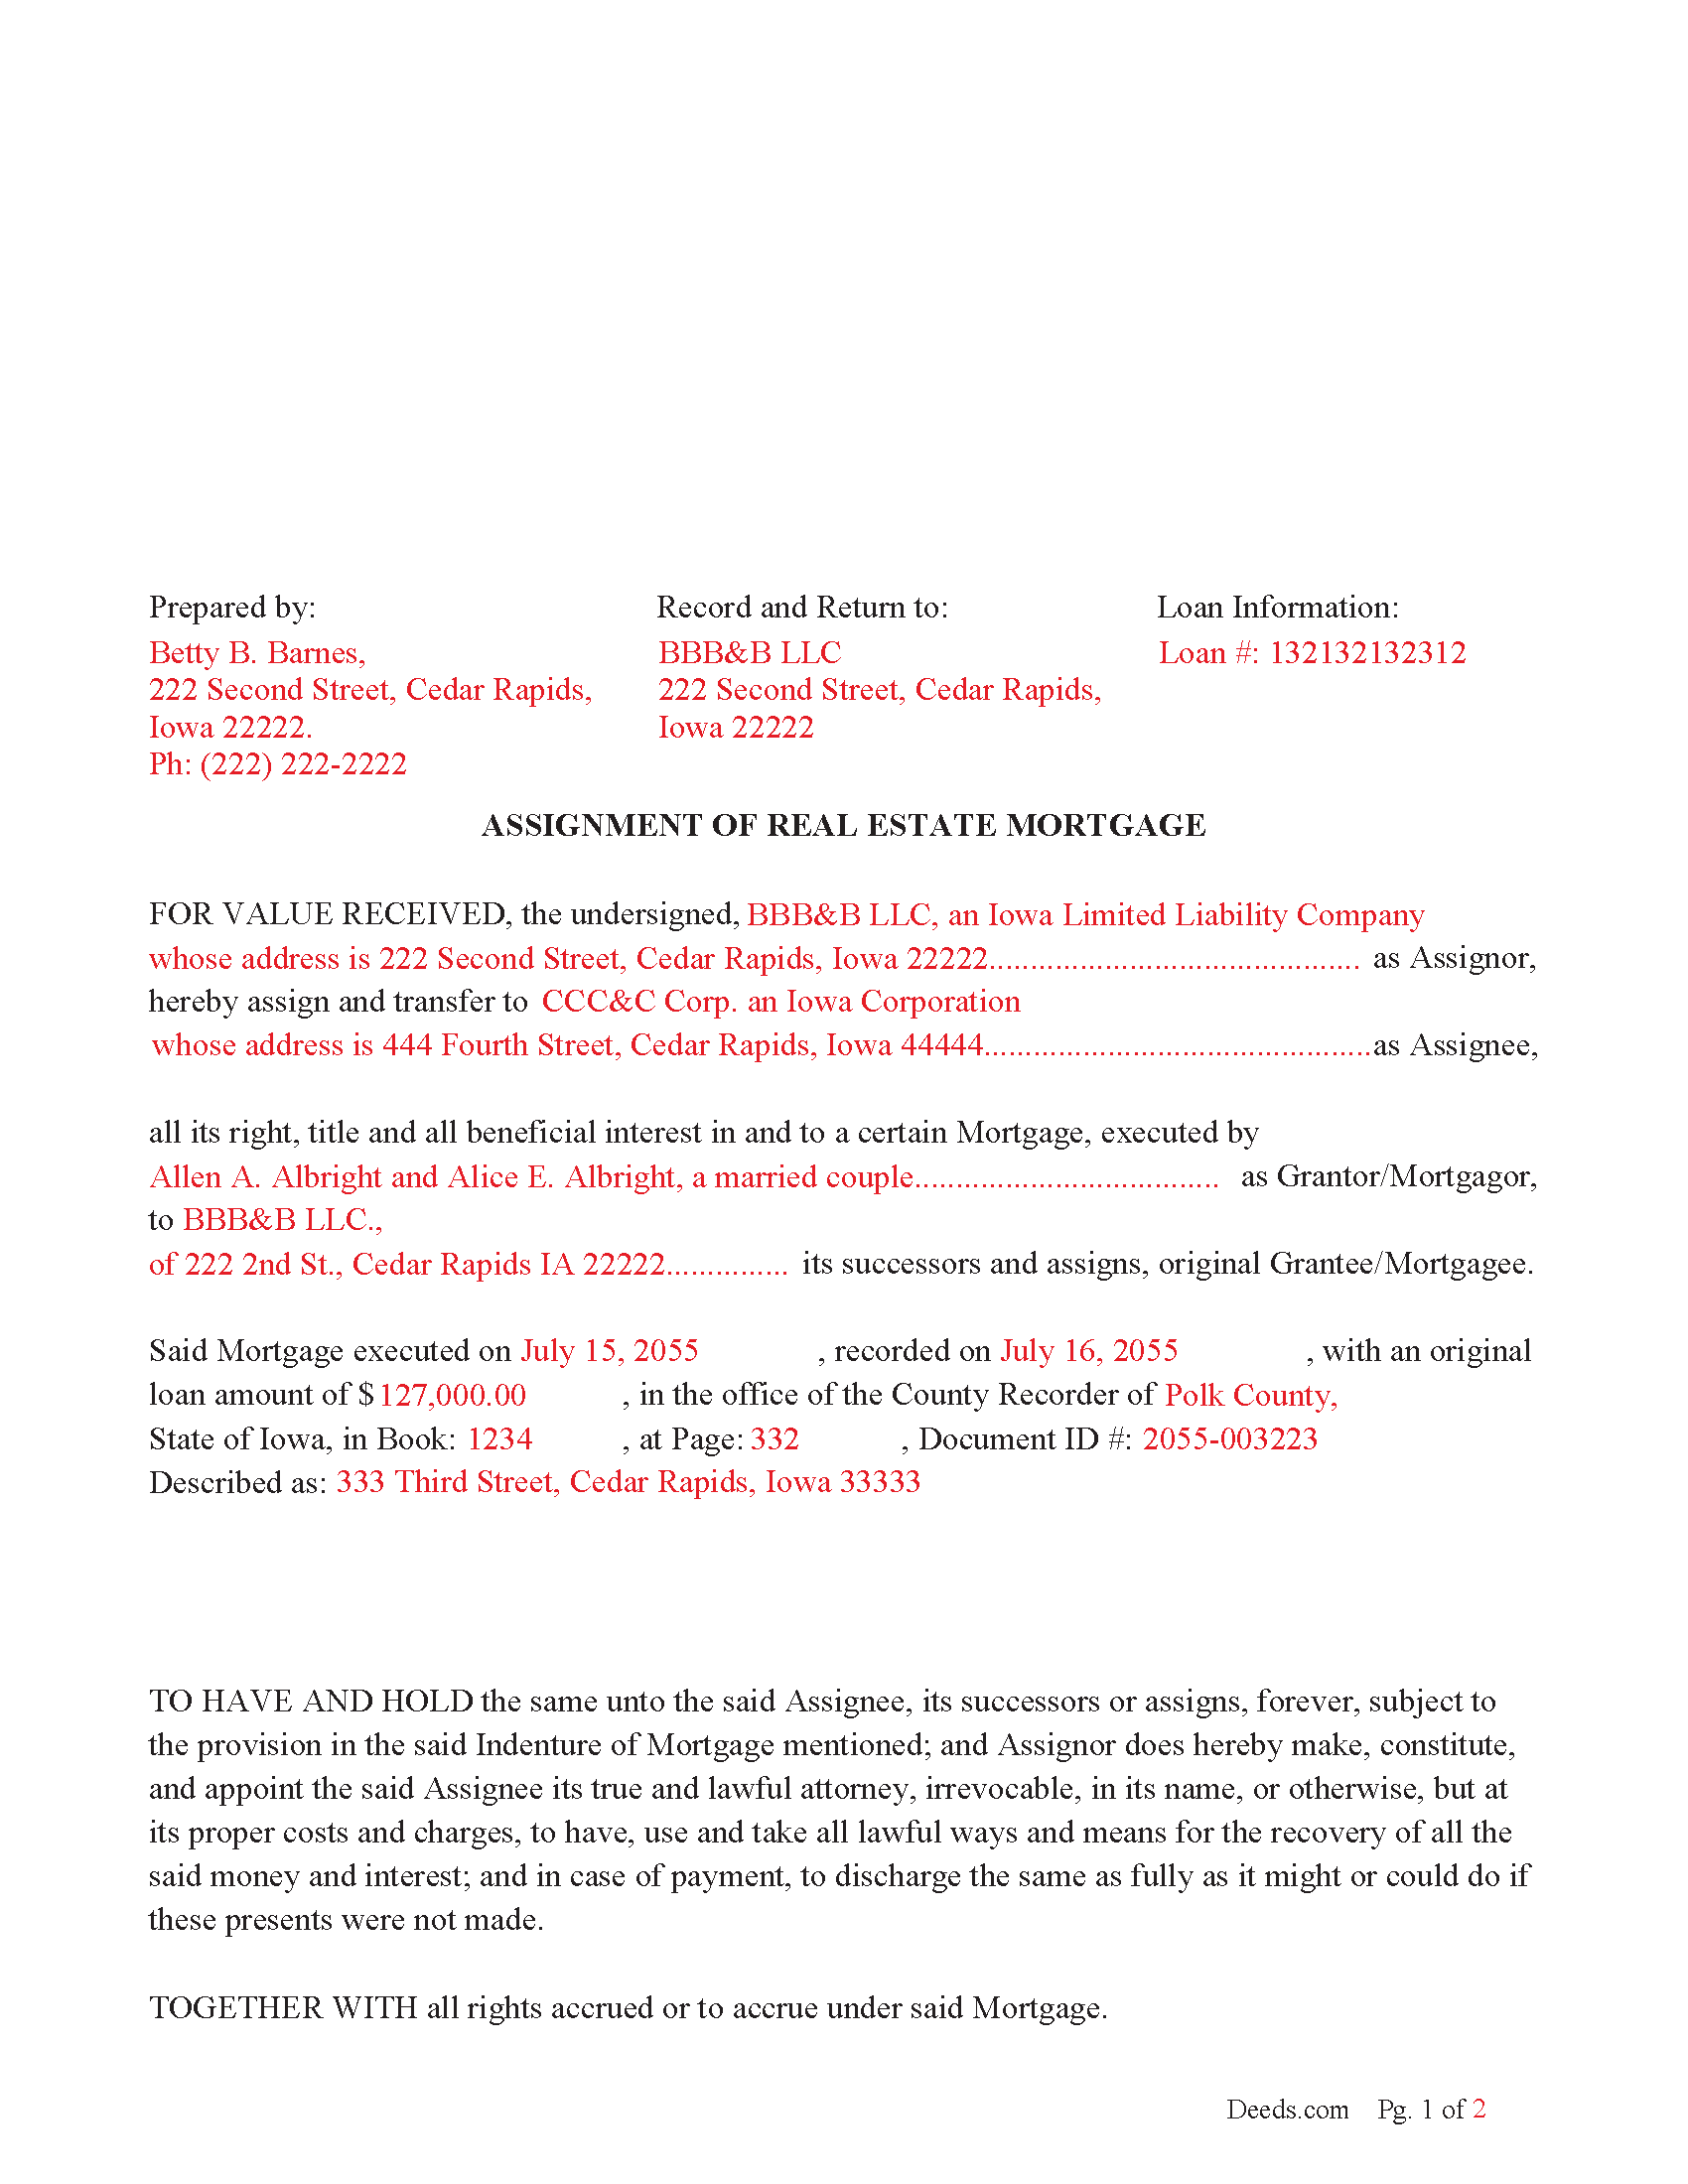 Completed Example of an Assignment of Real Estate Mortgage Document